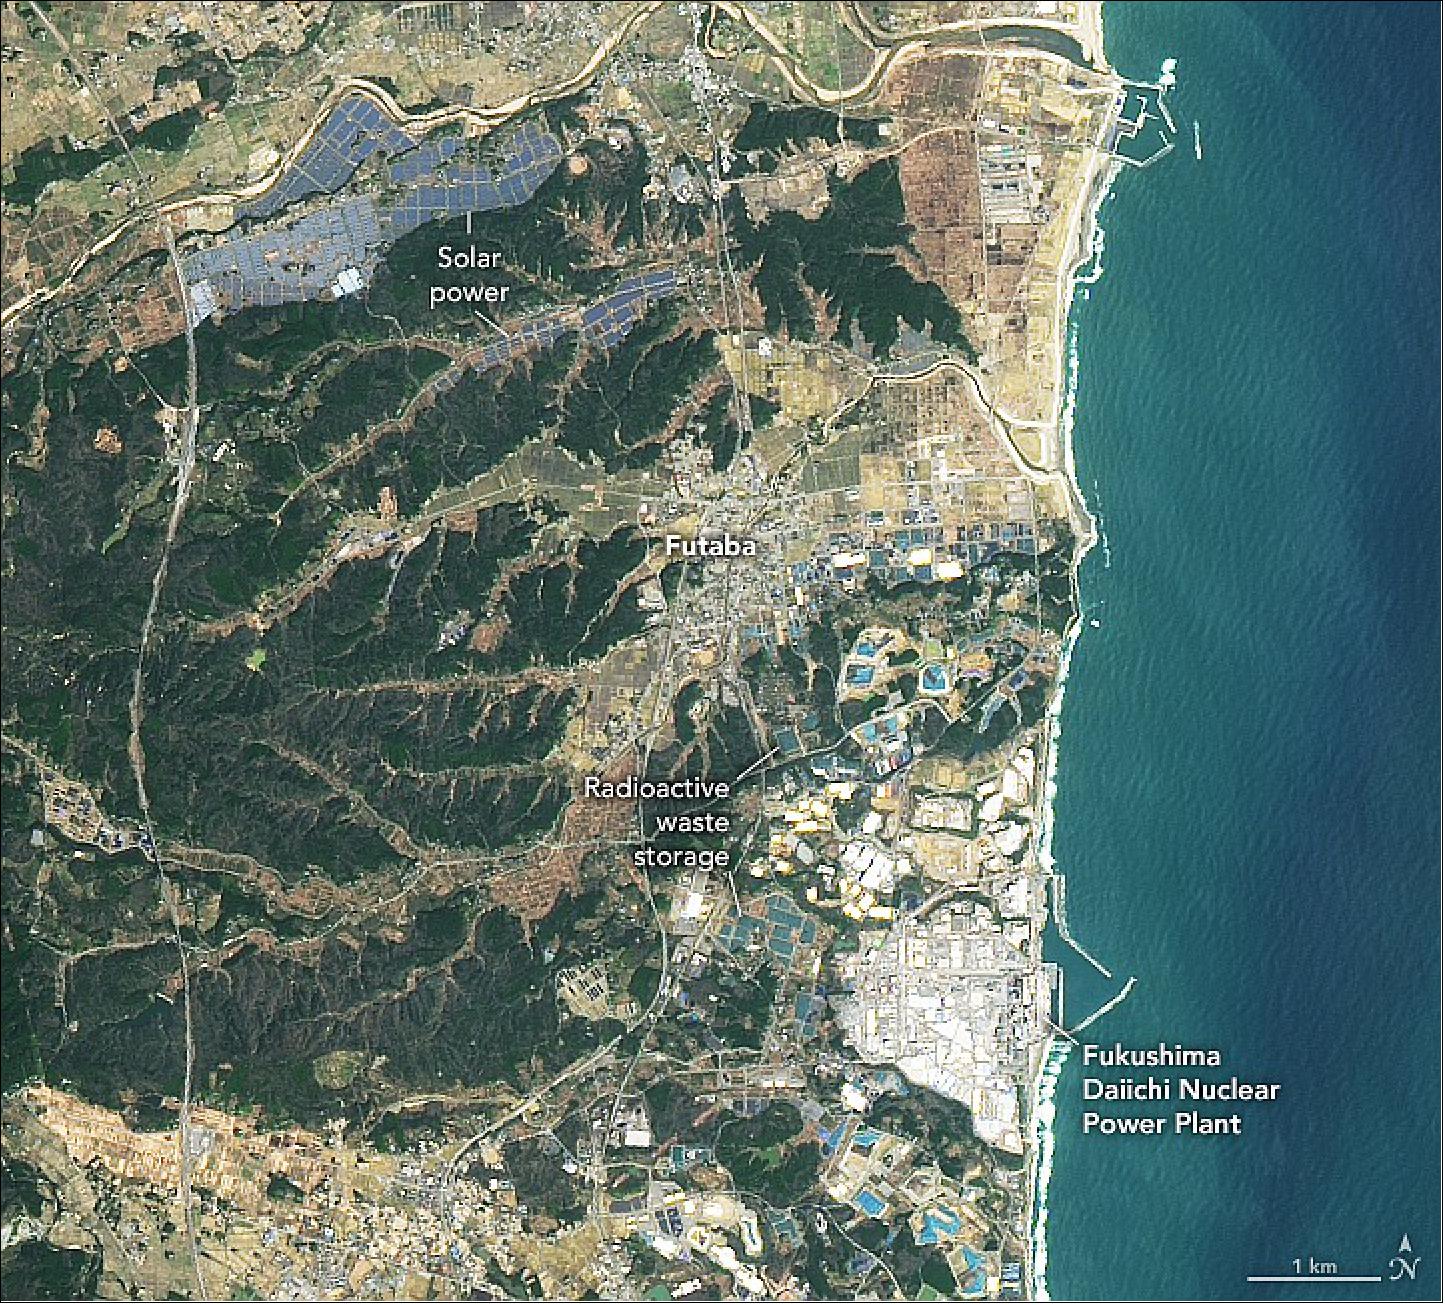 Figure 60: The OLI instrument of Landsat-8 acquired these natural-color image of the region on March 31, 2021. For comparison, the other image (Figure 59) shows the same area in April 2014. Some of the most prominent solar installations are located near the towns of Futaba and Tomioka (Figure 61), image credit: NASA Earth Observatory